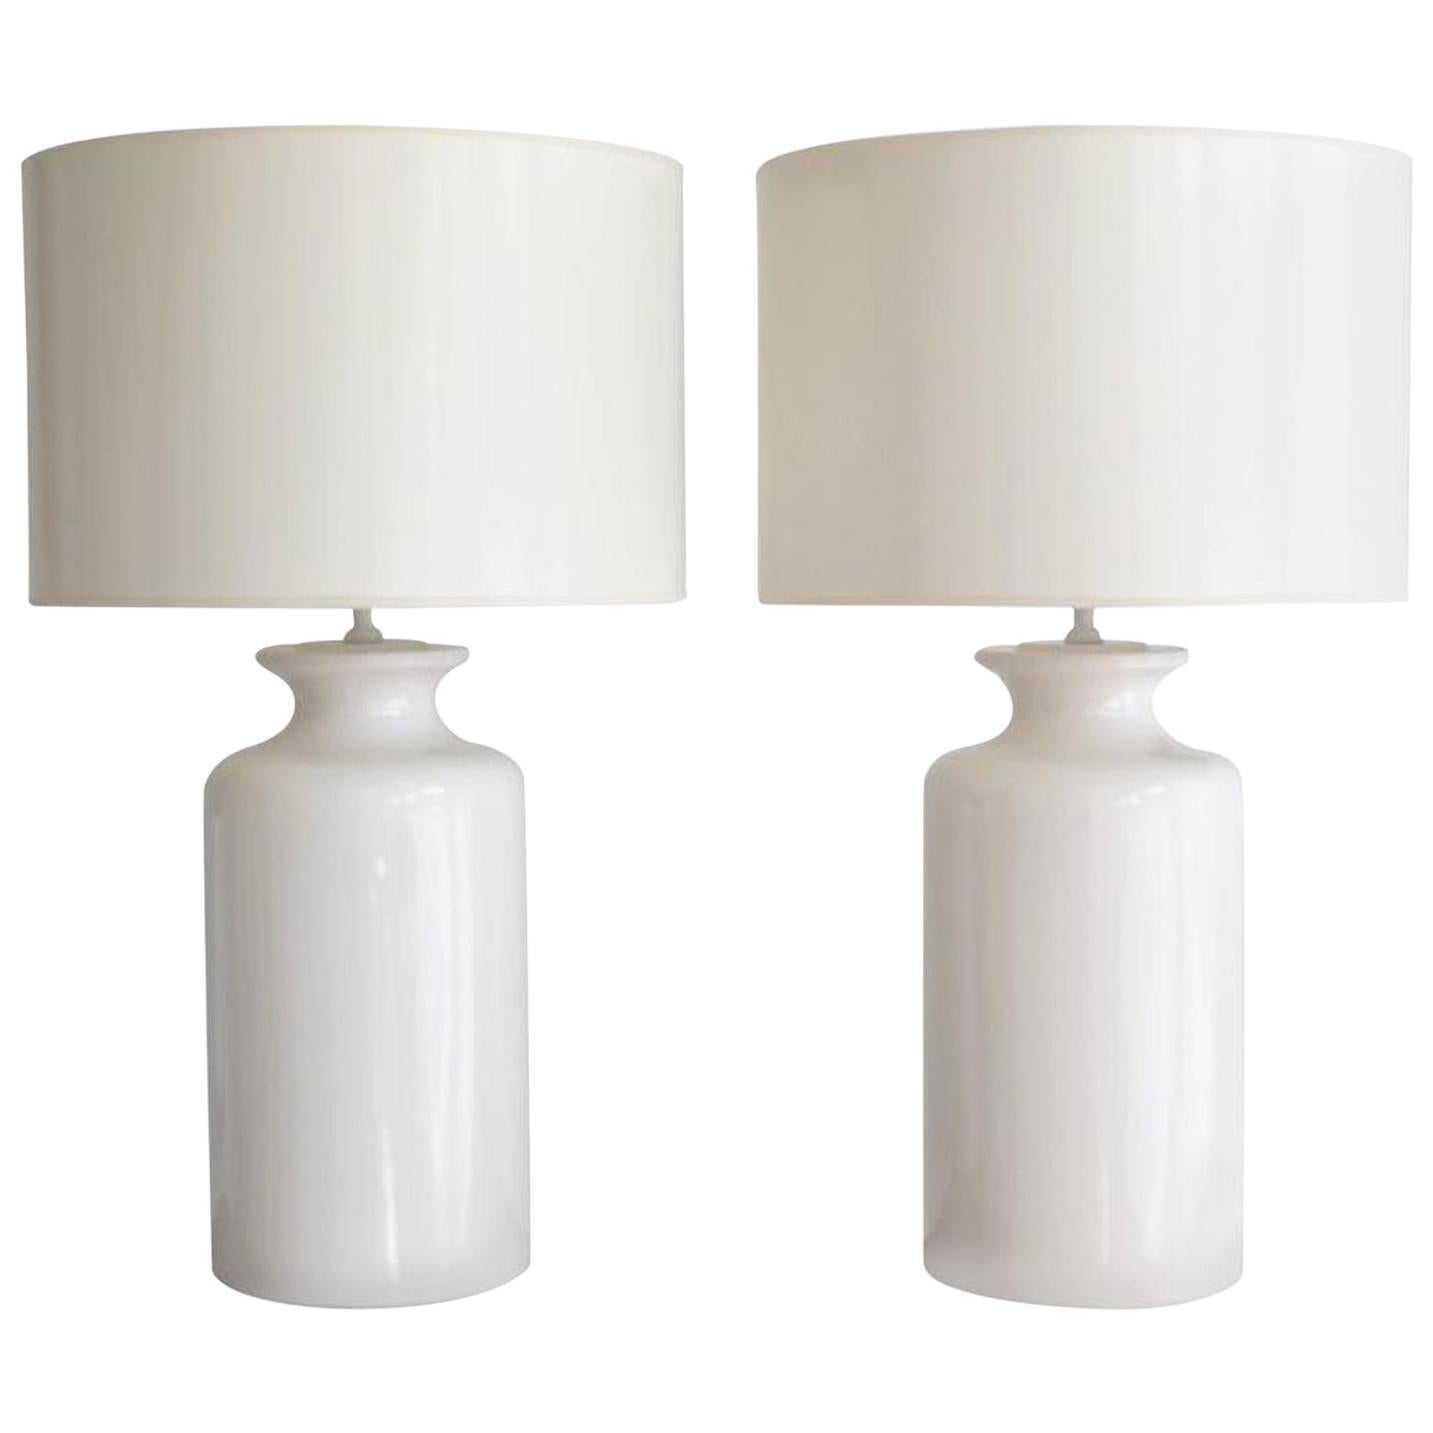 Pair of White Glazed Ceramic Jar Form Table Lamps For Sale